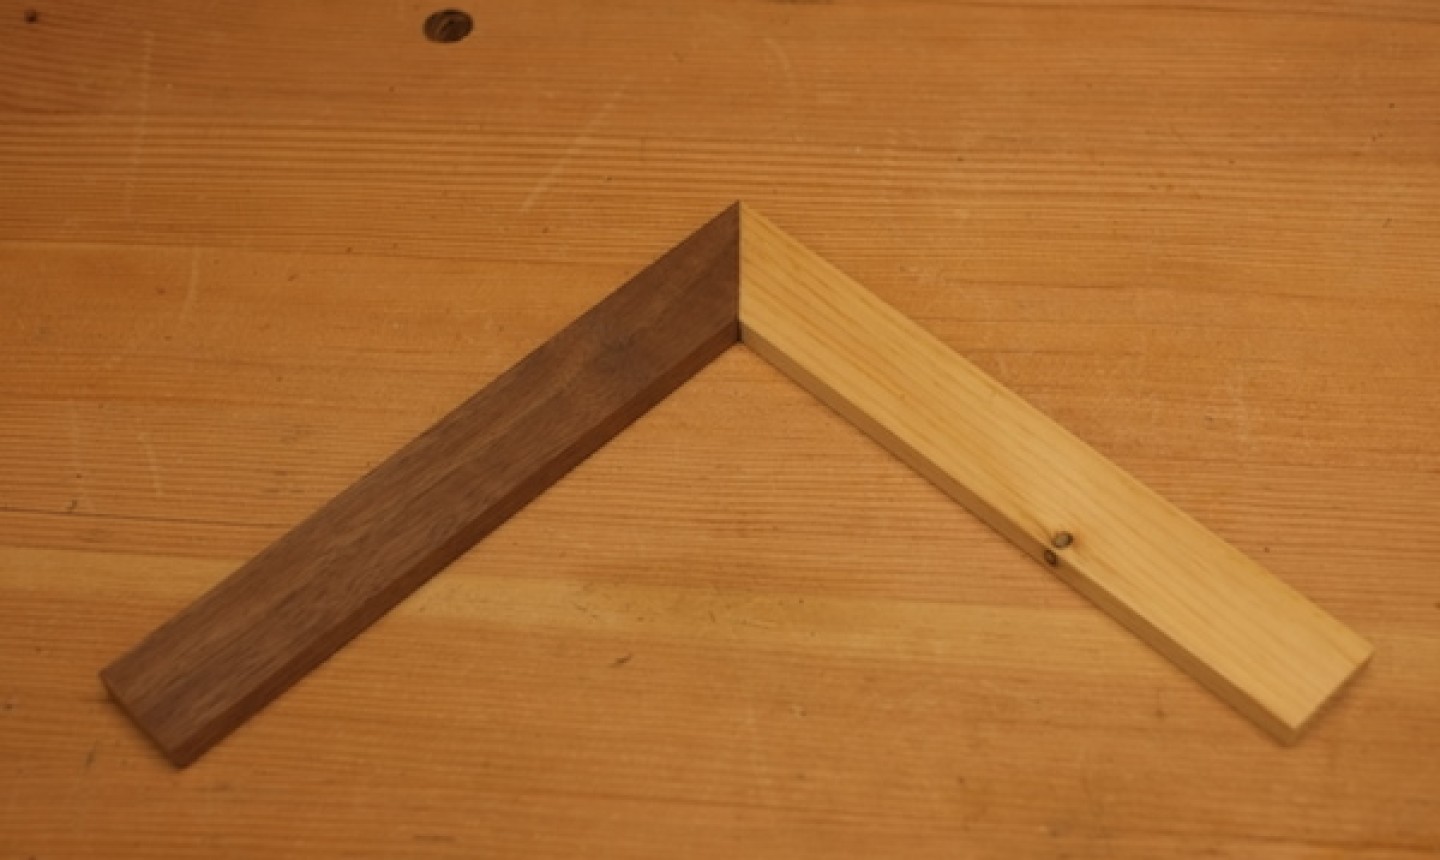 Miter joint